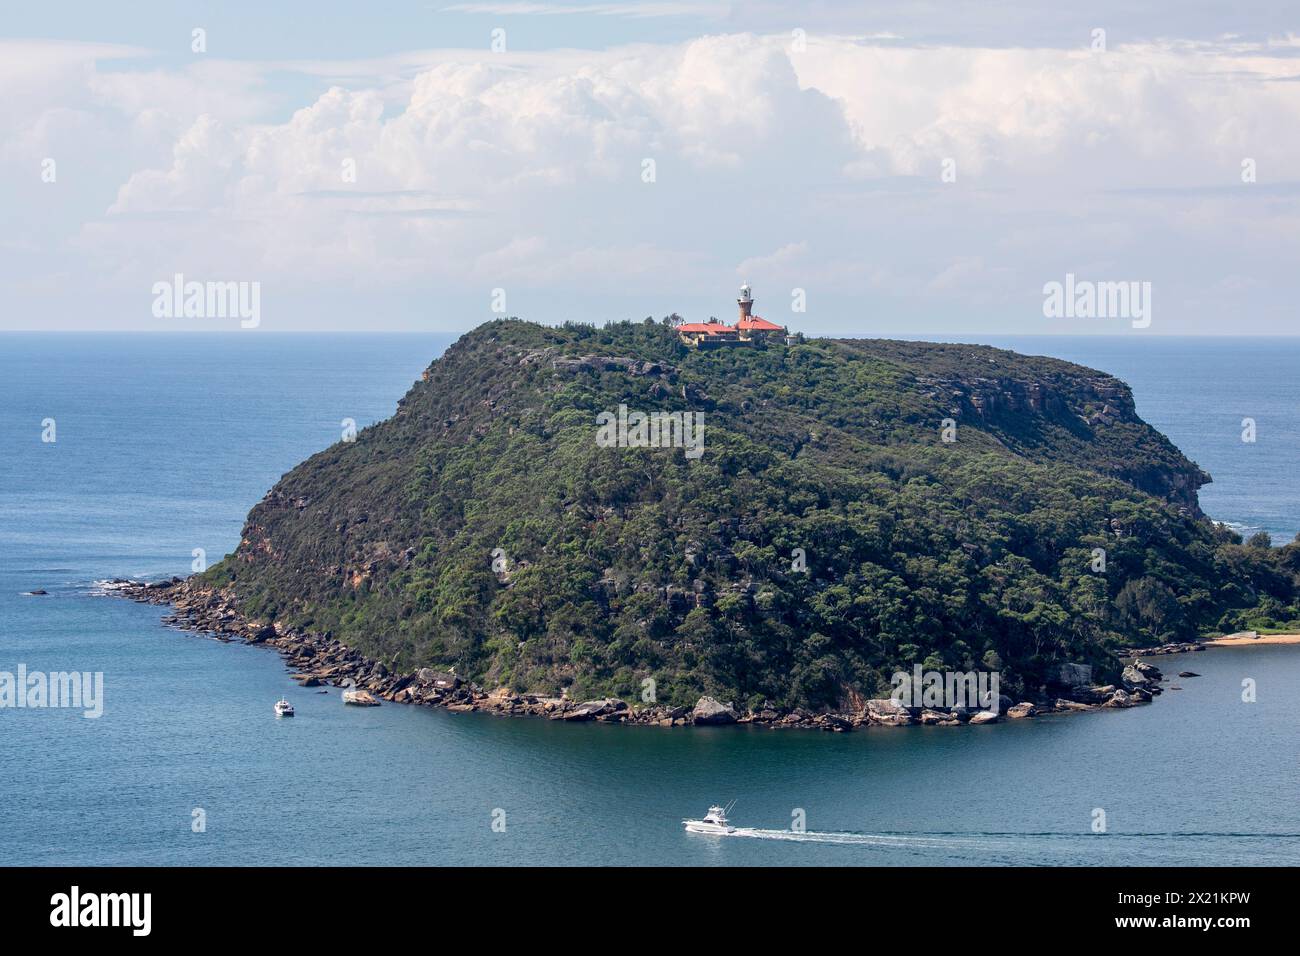 Barrenjoey Headland and peninsula, viewed from West Head lookout, Barrenjoey lighthouse on the headland, Pittwater and ocean views, Sydney,Australia Stock Photo